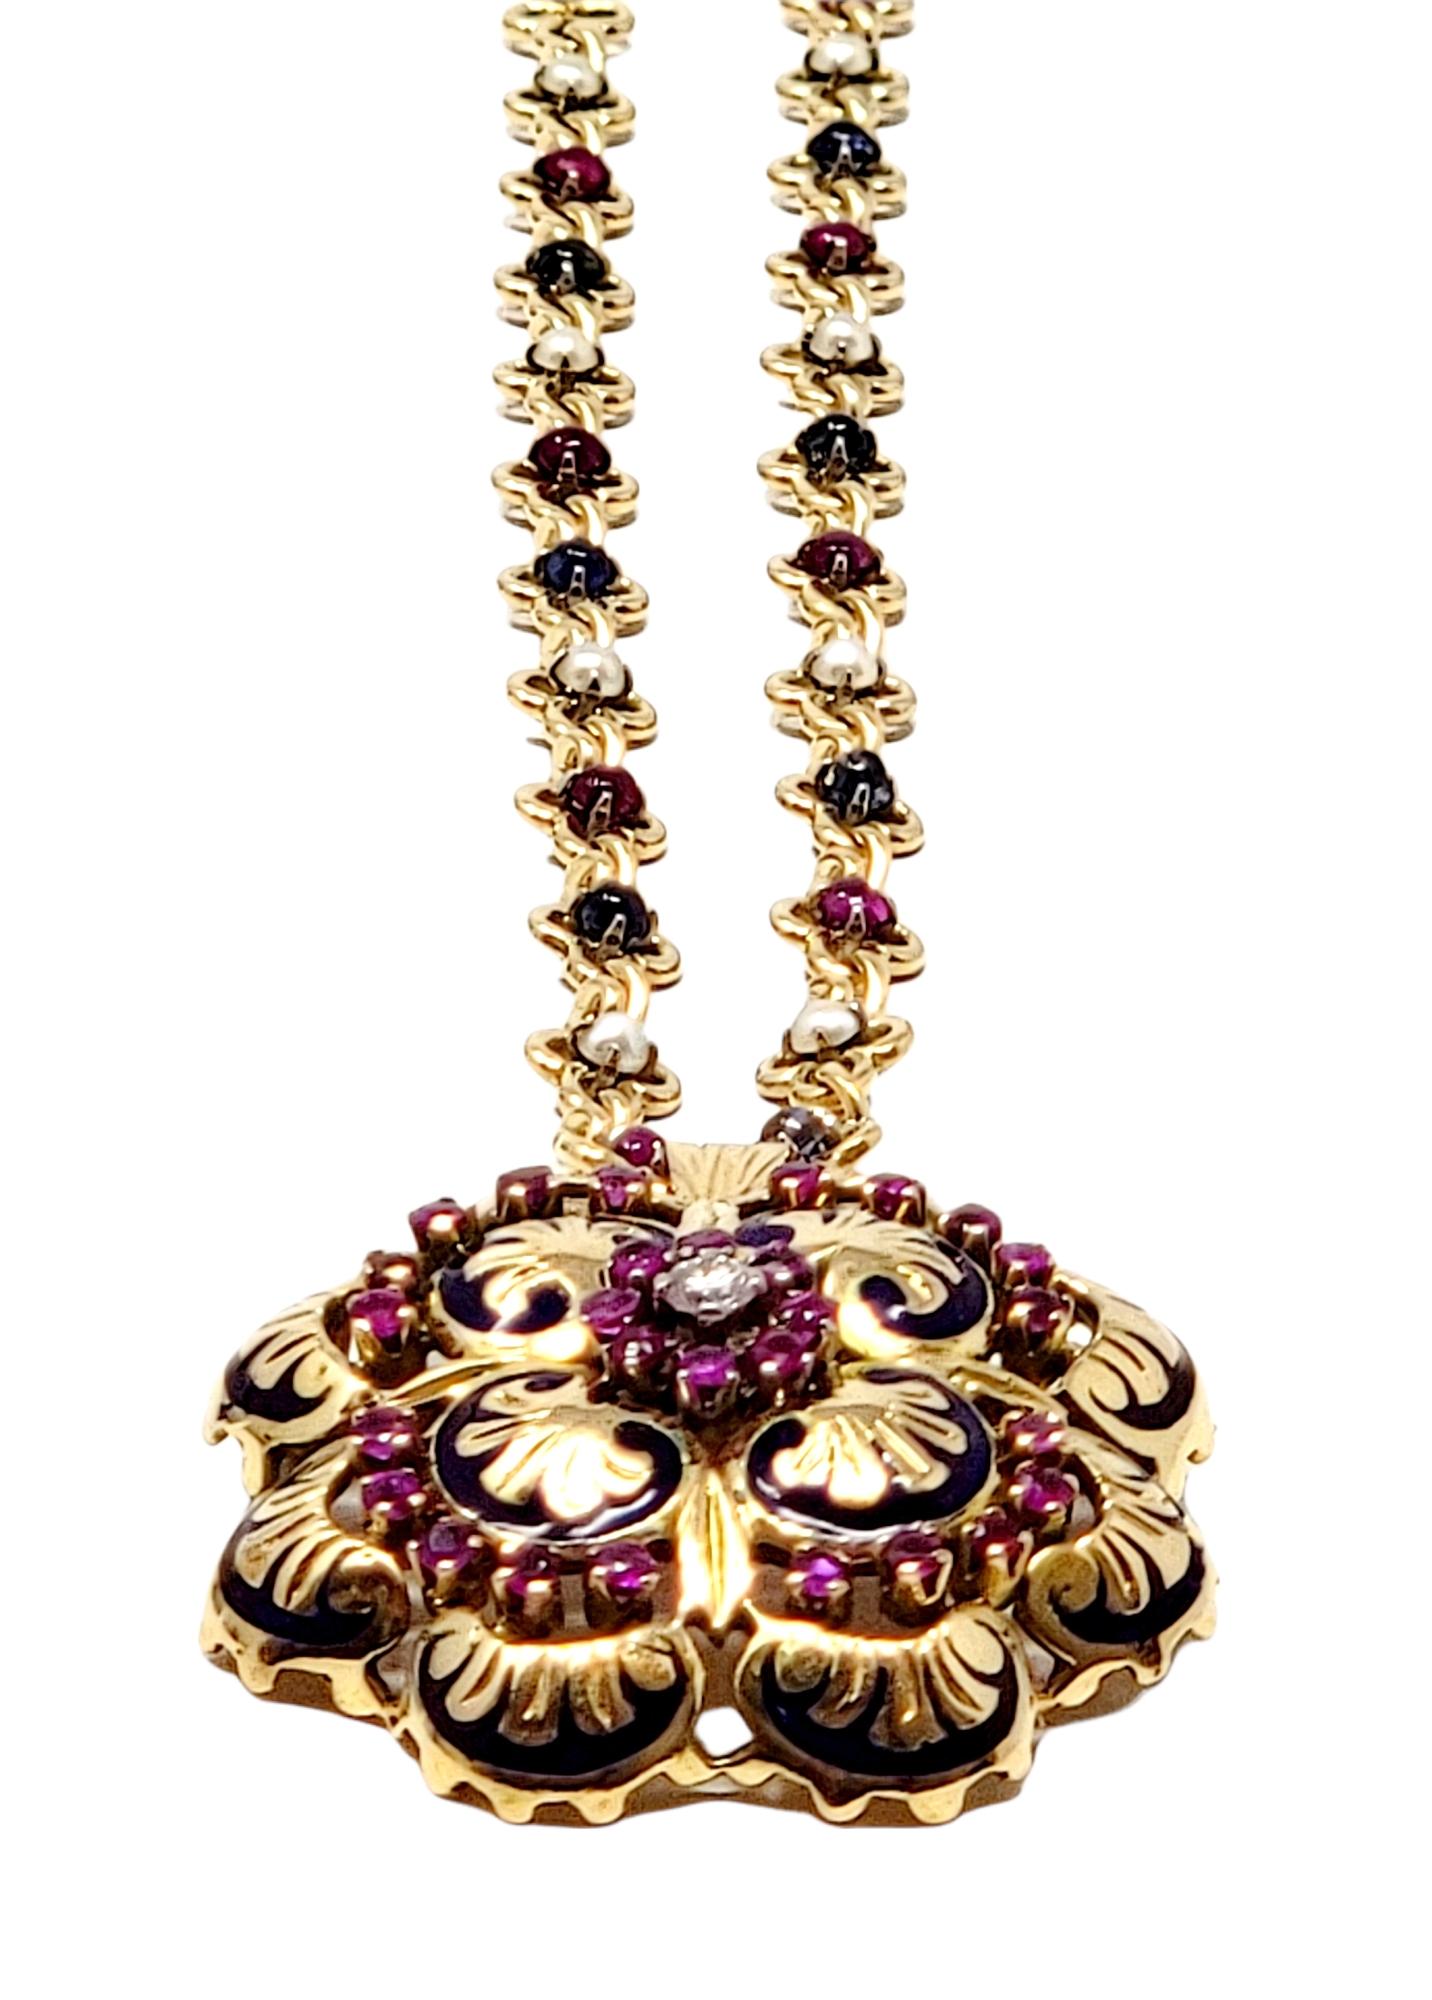 Diamond, Ruby, Sapphire and Pearl Pendant / Brooch with Link Chain 18 Karat Gold In Good Condition For Sale In Scottsdale, AZ